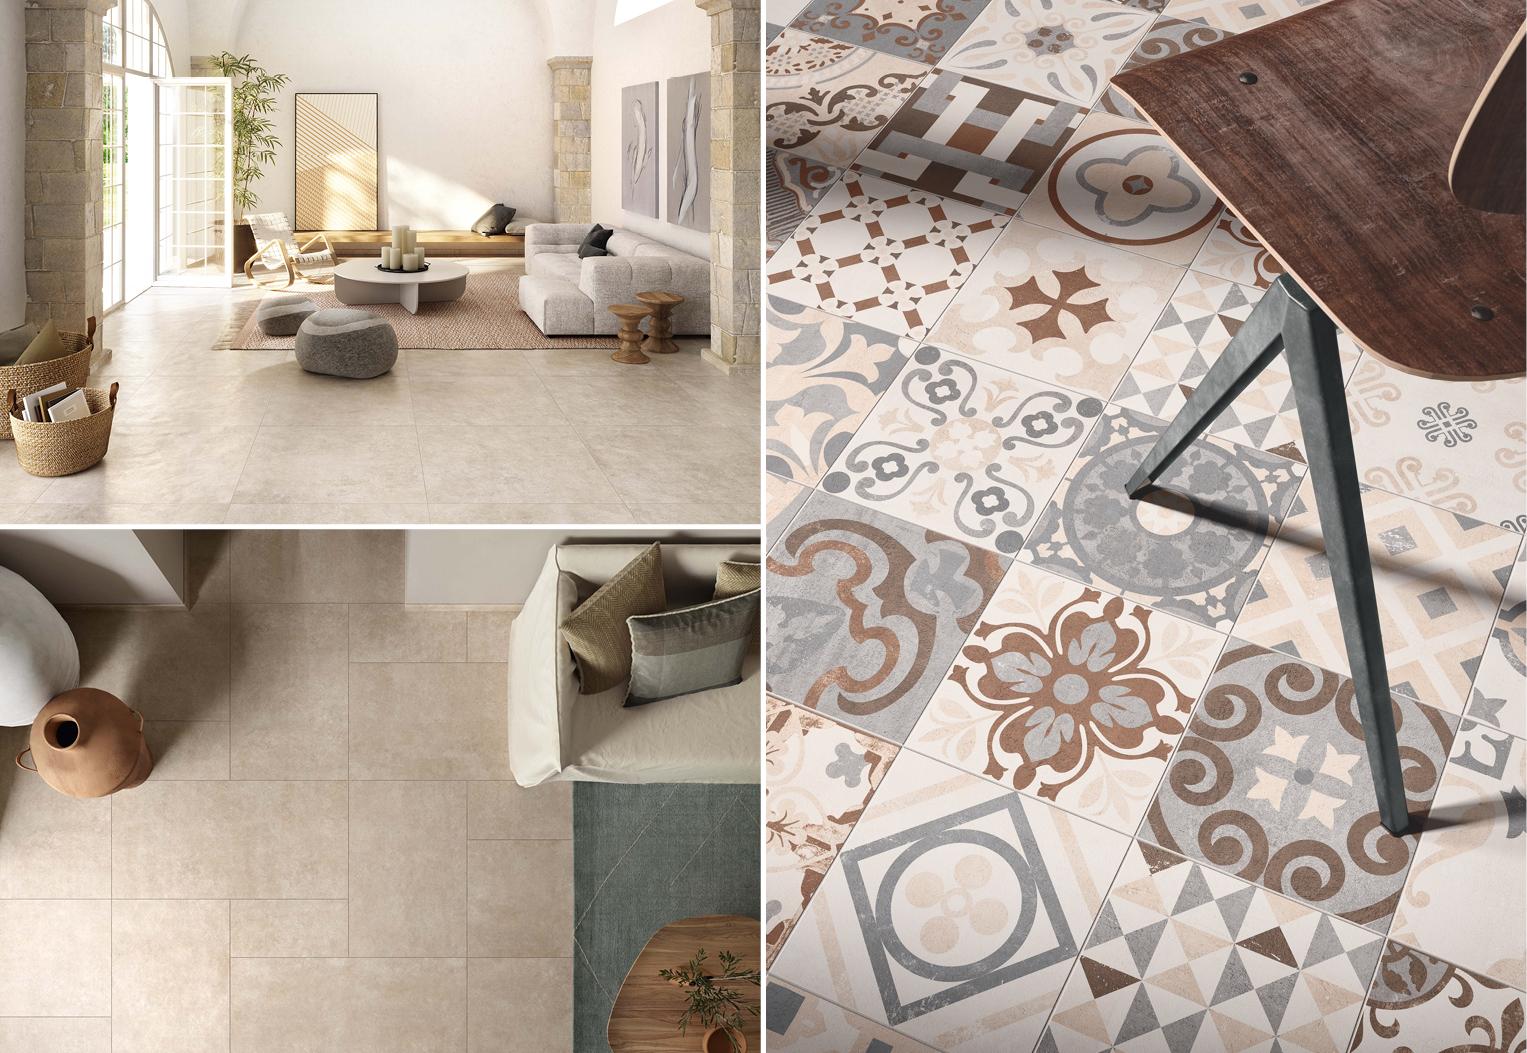 Country style: décor ideas with porcelain stoneware | Casalgrande Padana